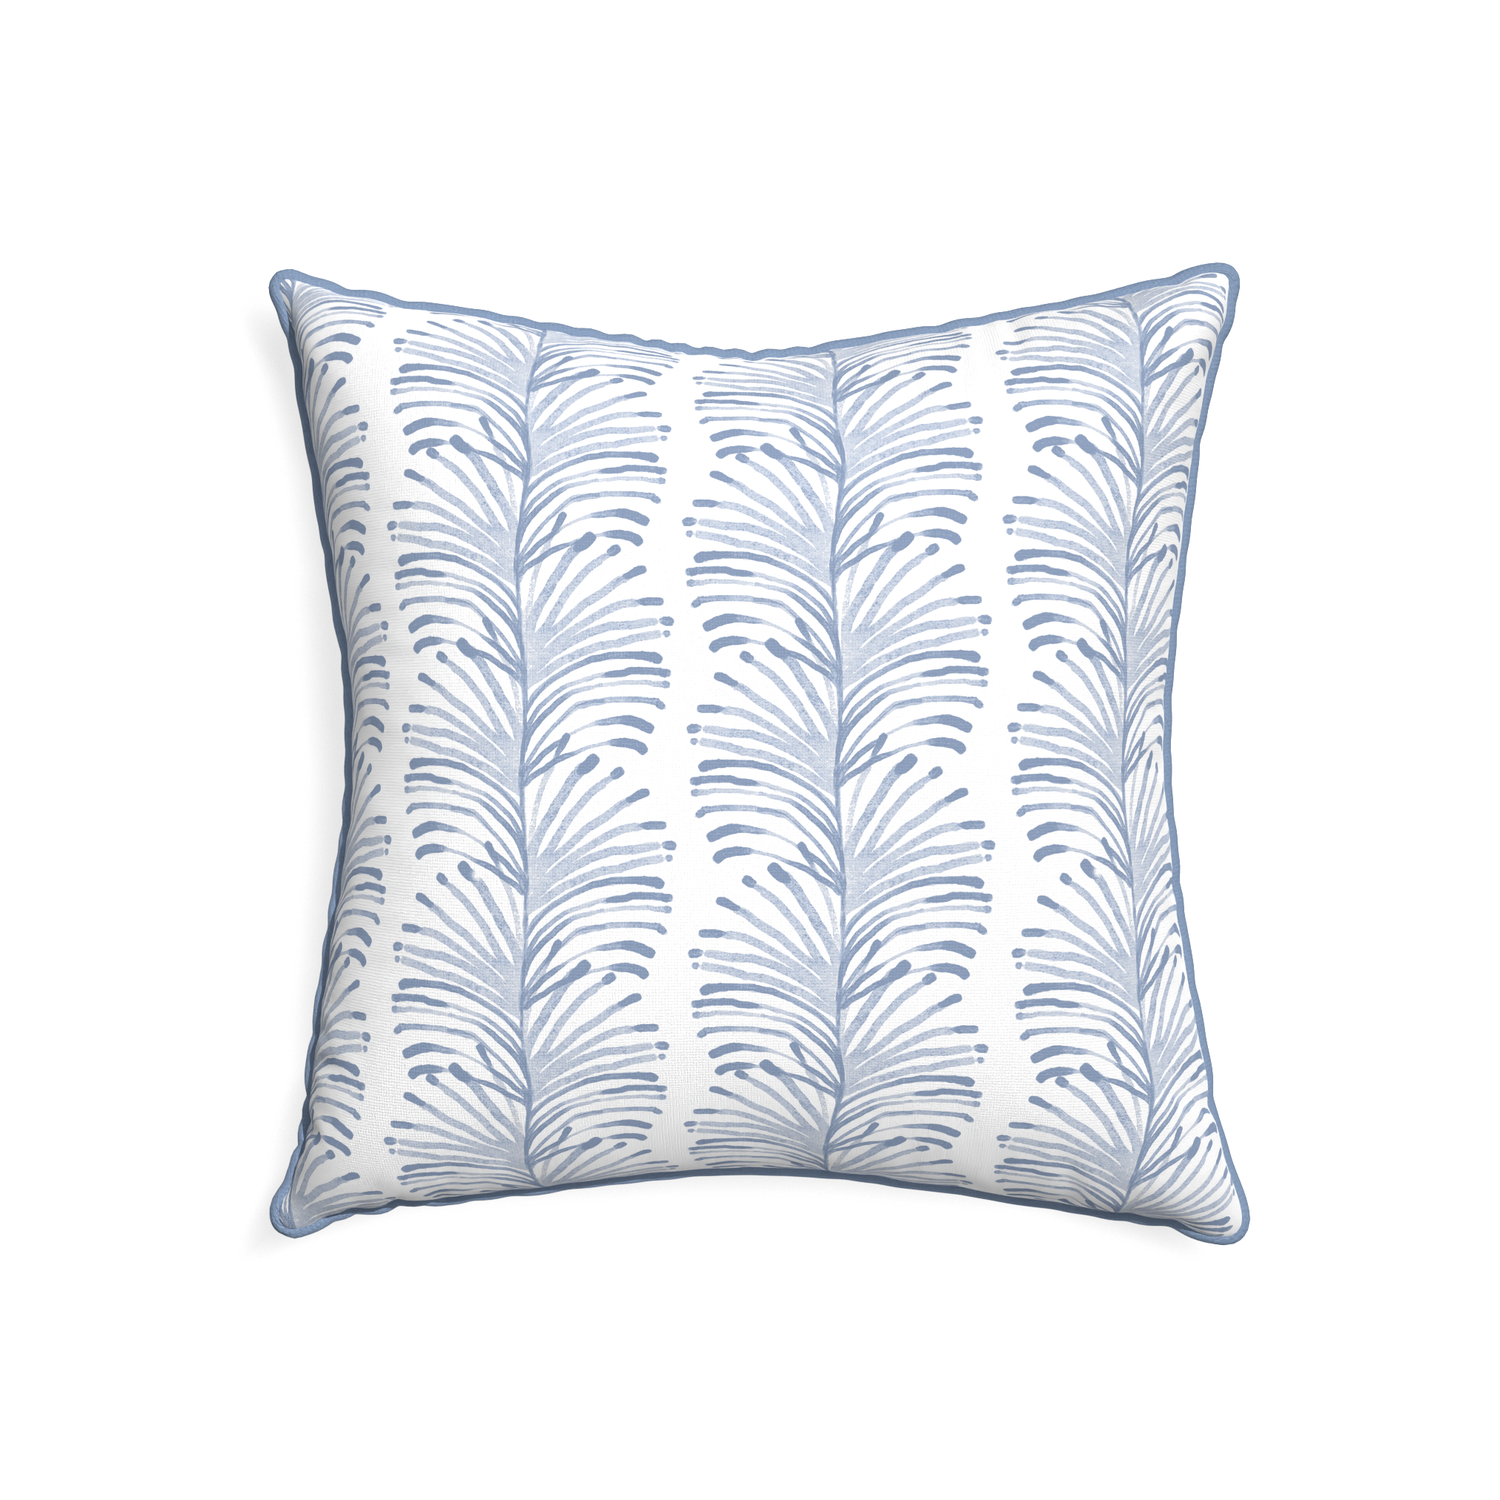 22-square emma sky custom sky blue botanical stripepillow with sky piping on white background